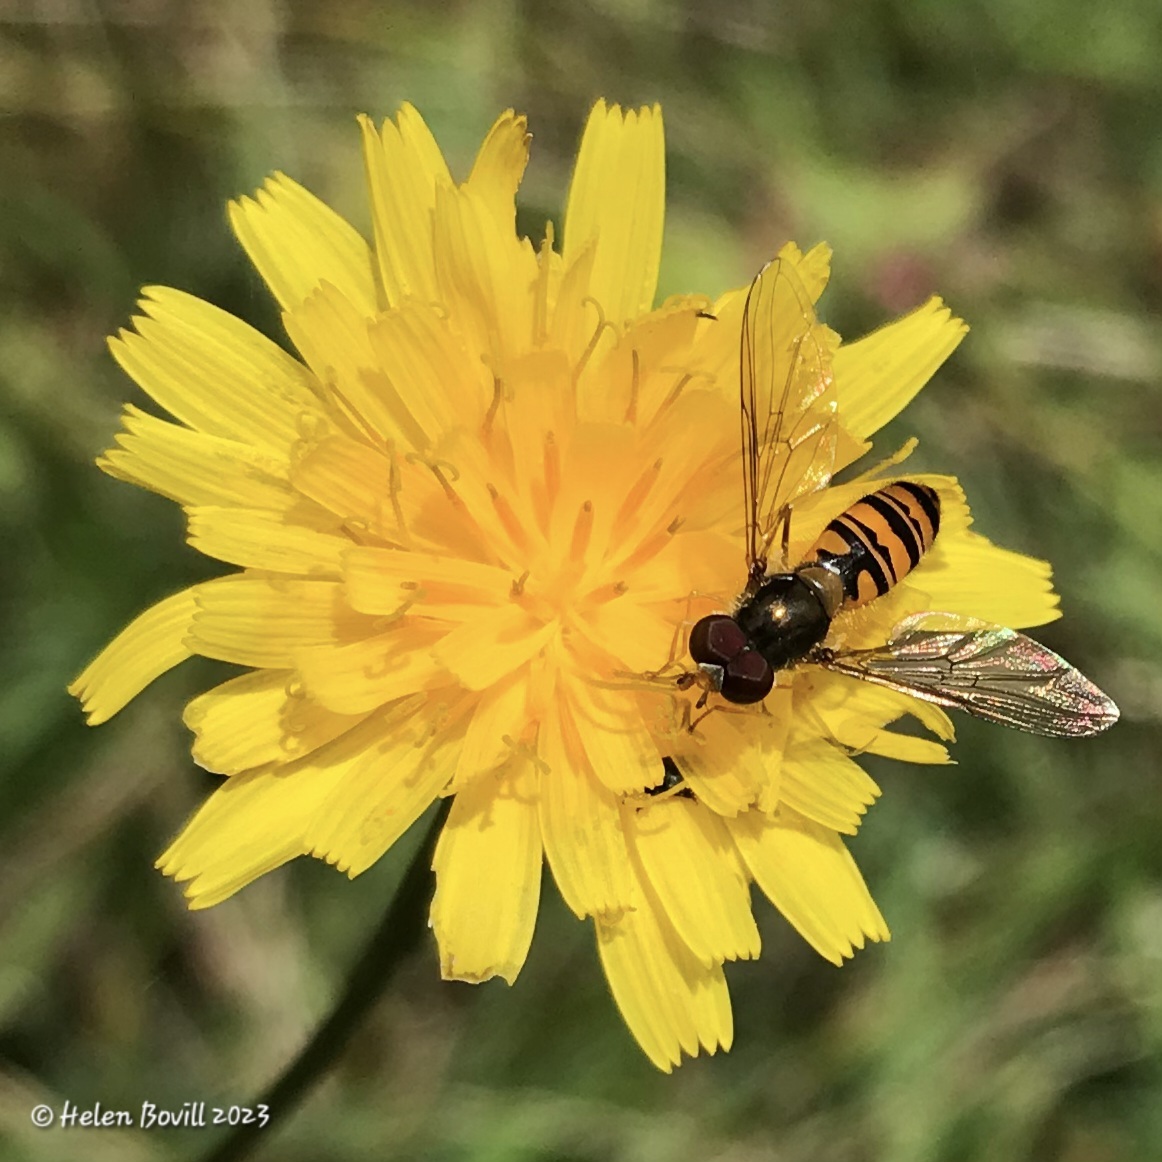 A Marmalade Hoverfly on a yellow flower